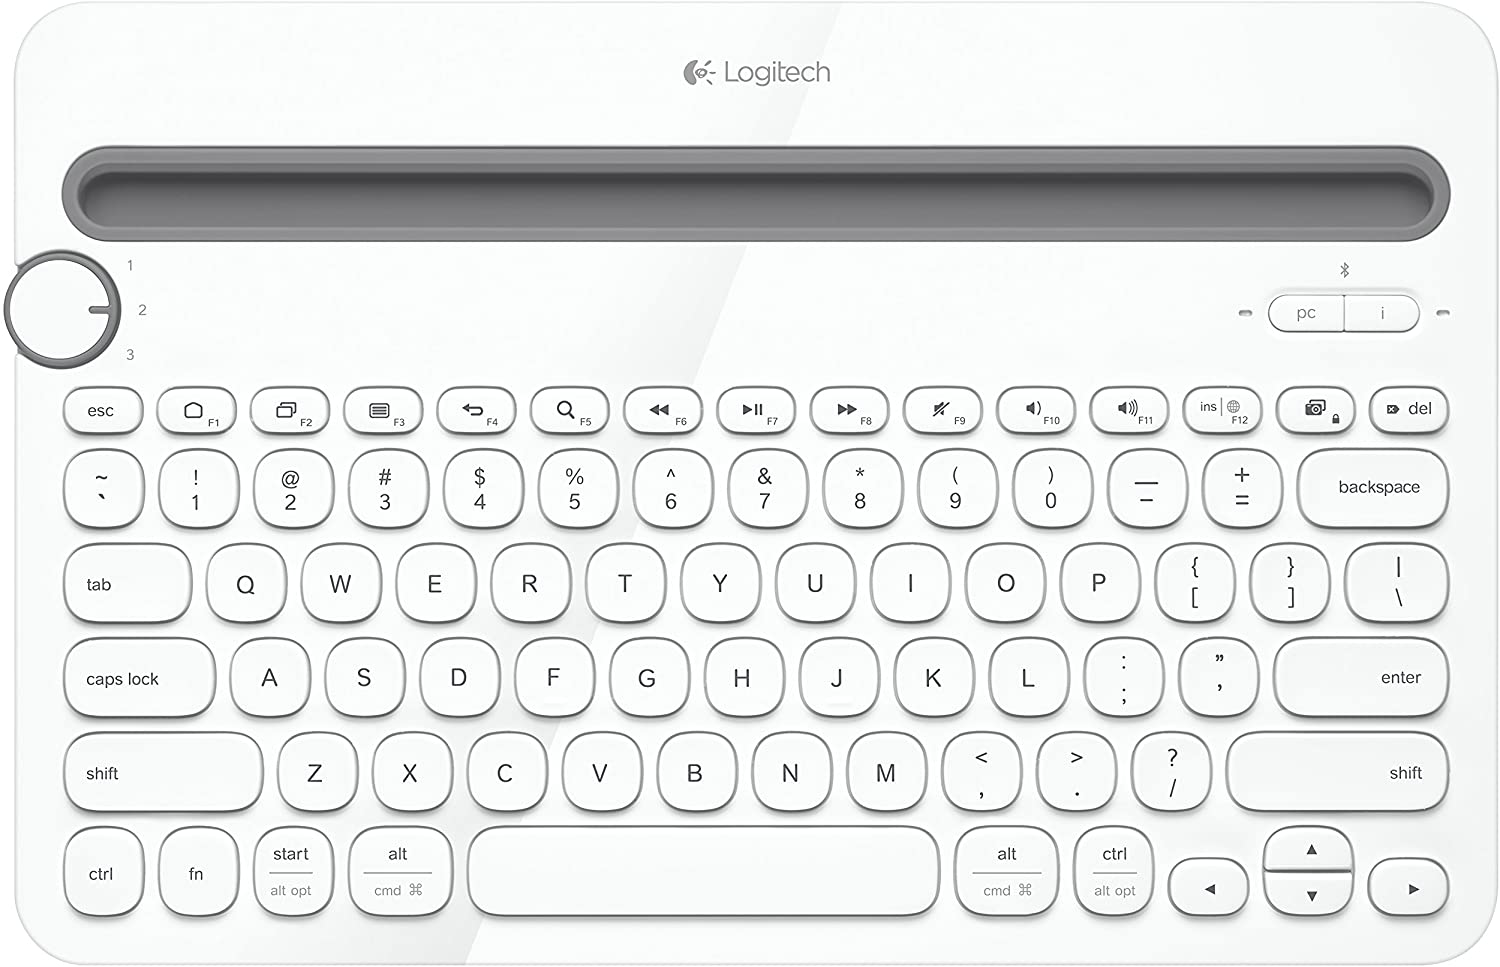 Logitech K480 Bluetooth Multi-Device Keyboard K480 Works with Windows and Mac Computers, Android and iOS Tablets and Smartphones